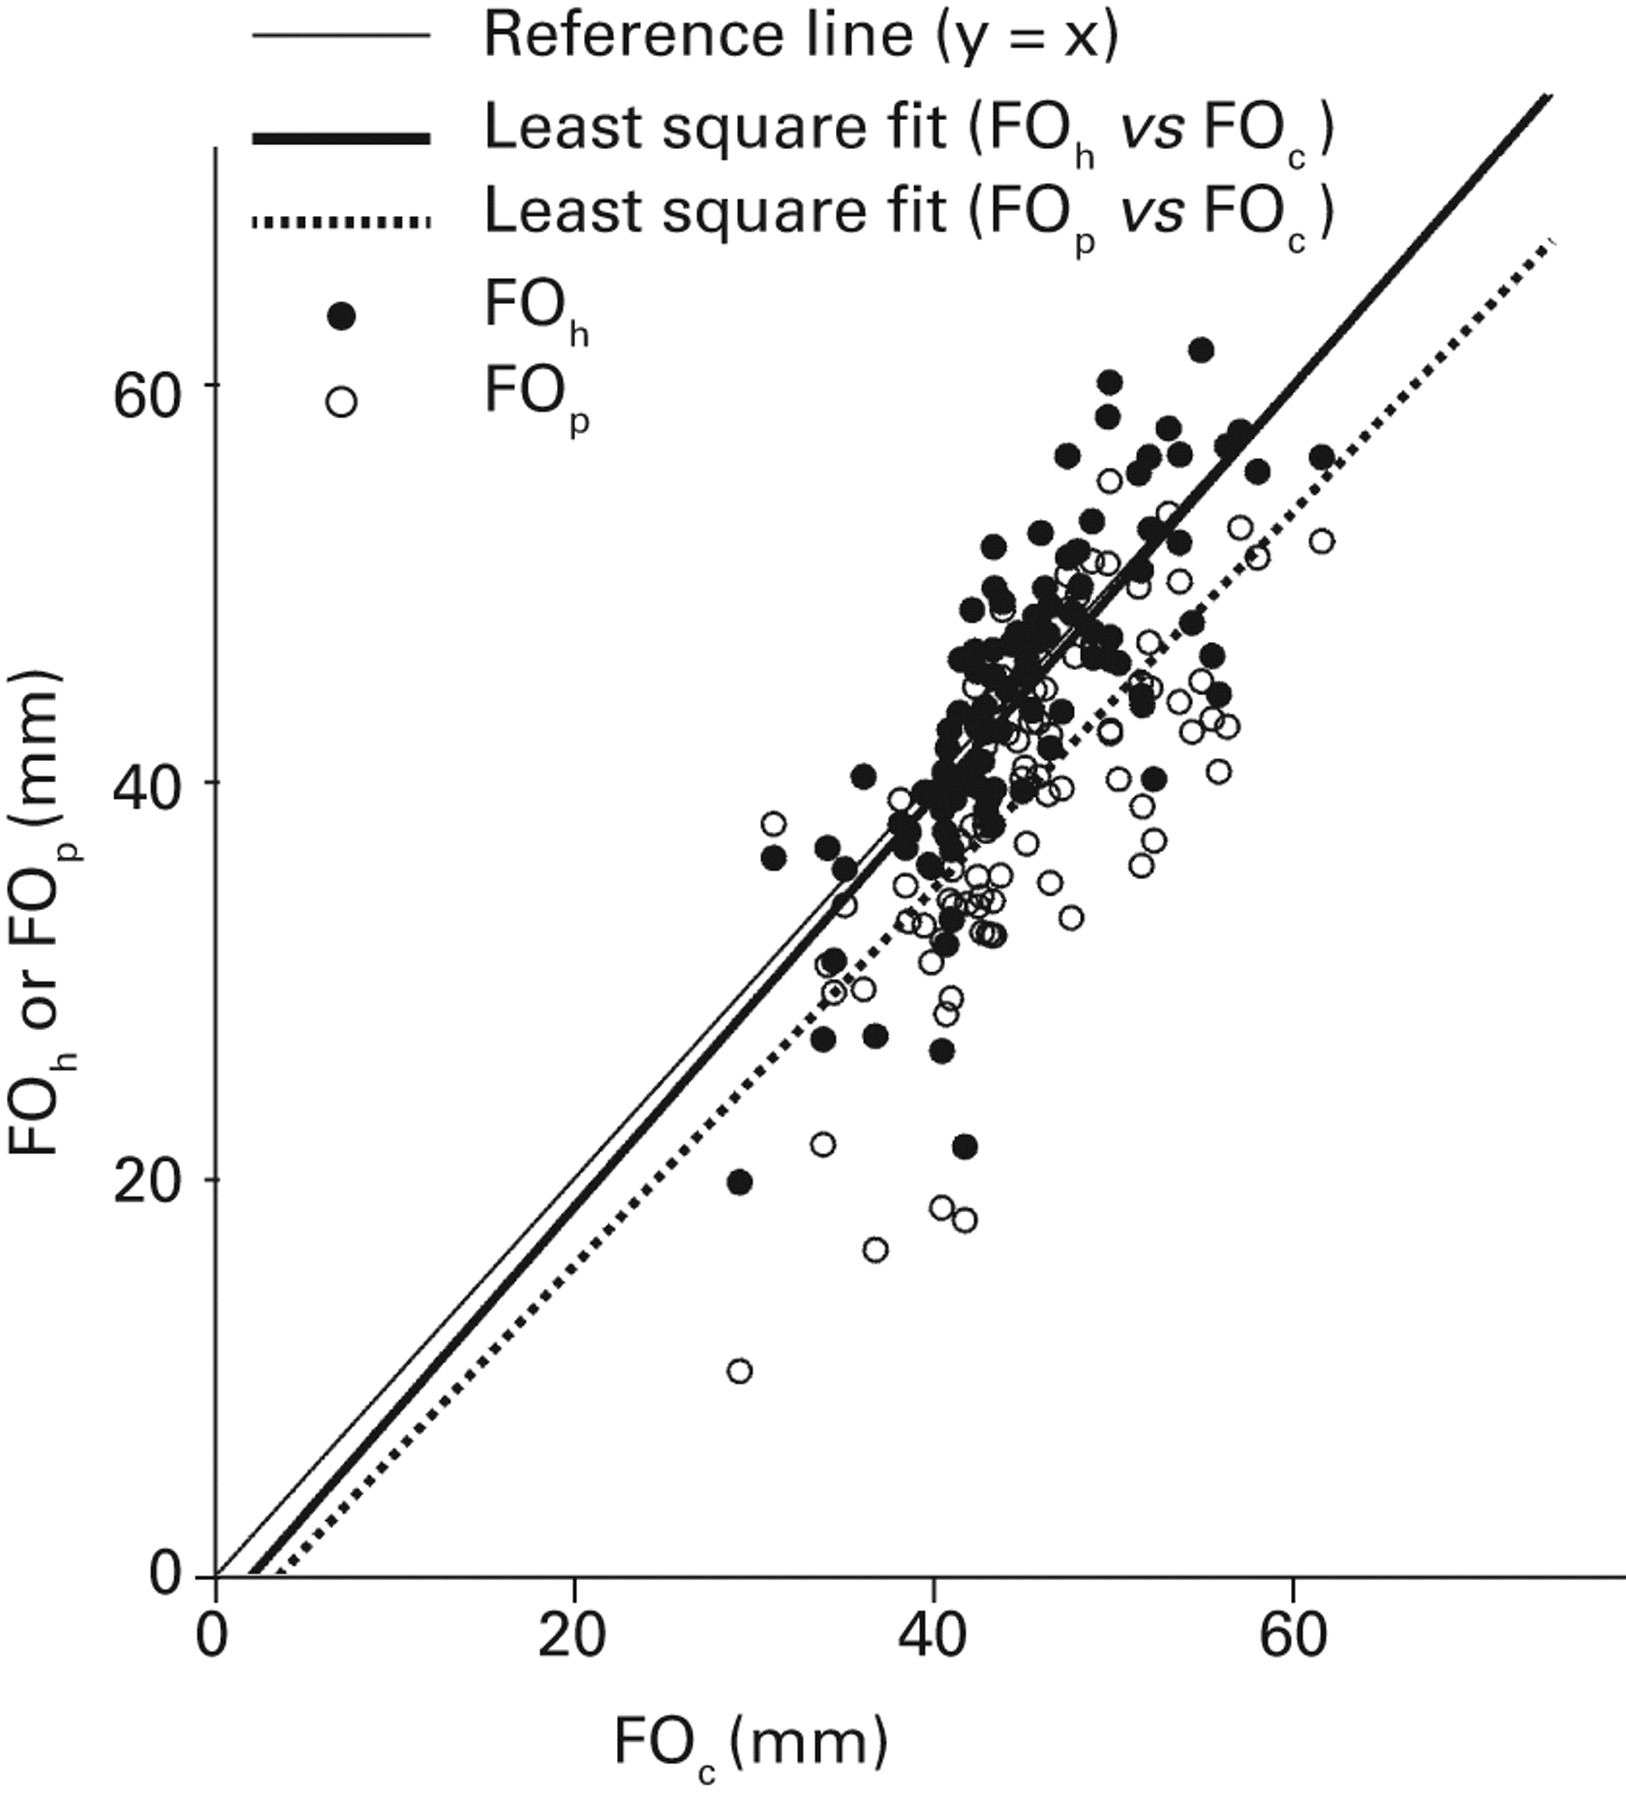 Fig. 5 
          Overlay scatter plot illustrating the
relationship between femoral offset as measured on anteroposterior
radiographs of the pelvis (FOp), hip (FOh)
and CT (FOc) in mm. The least square fit lines suggest
a good correlation of anteroposterior hip and CT values (R2 =
0.588).
        